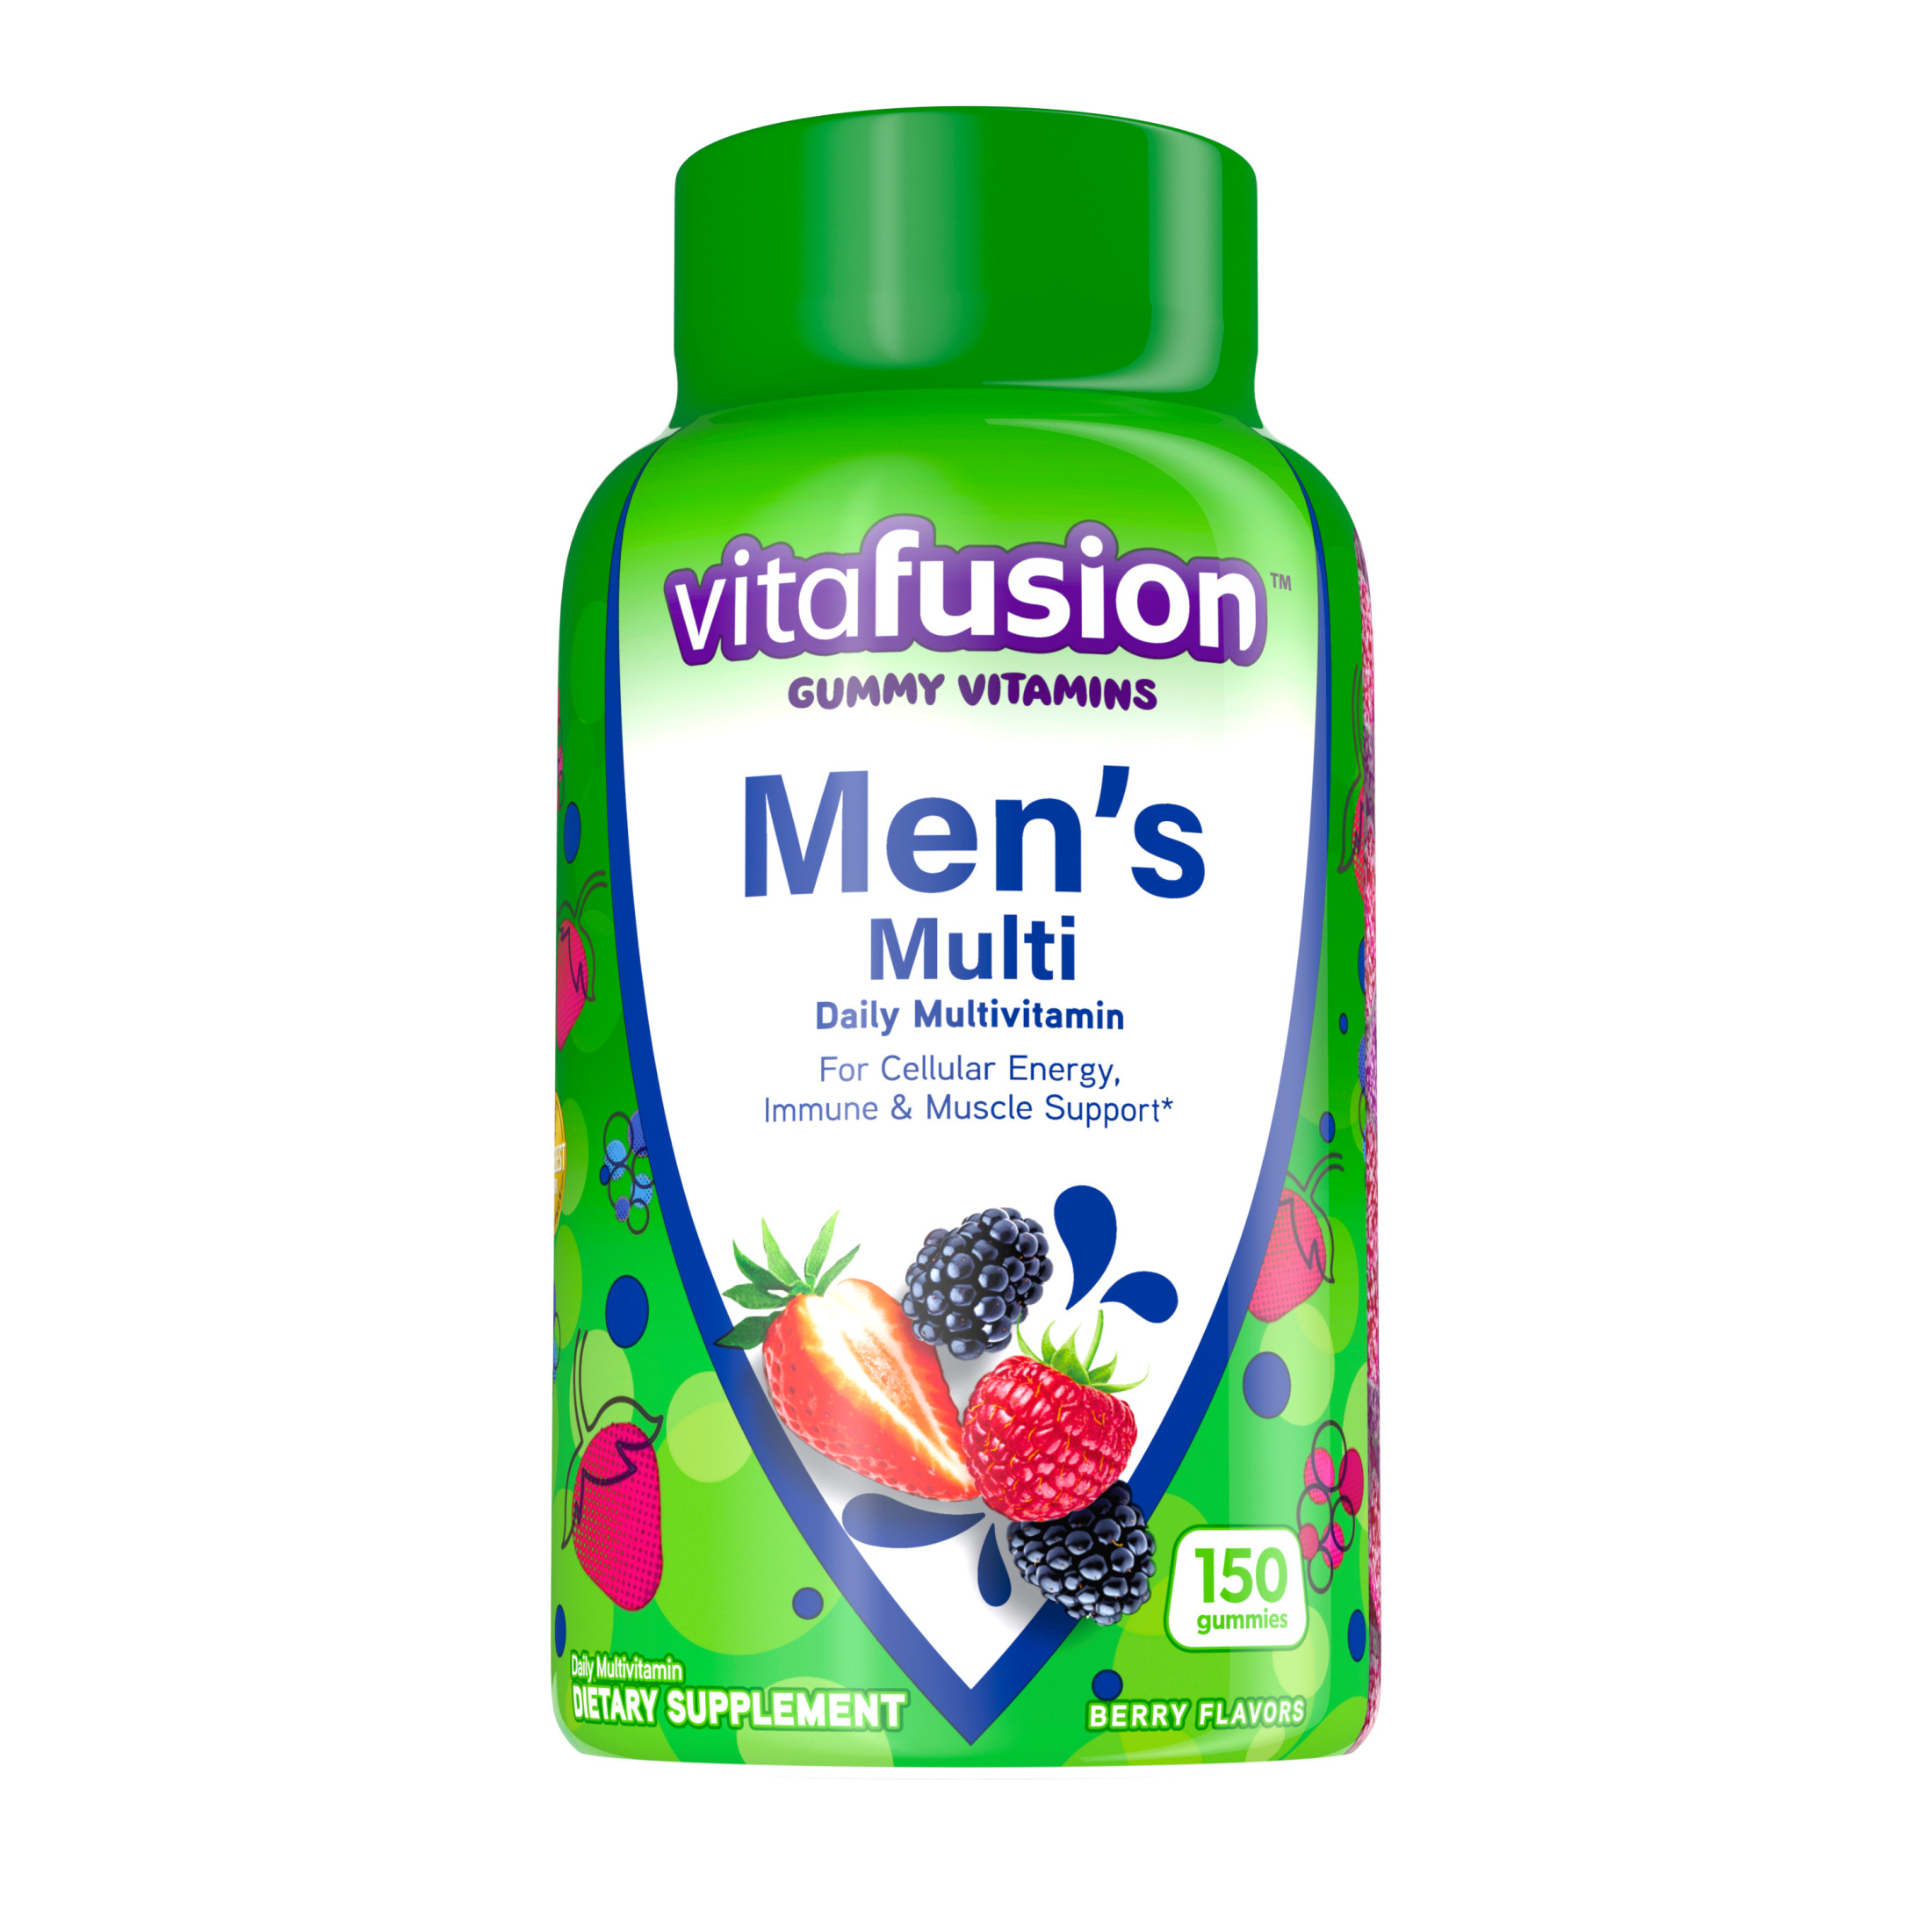 vitafusion Adult Gummy Vitamins for Men, Berry Flavored Daily Multivitamins for Men, 150 Count - image 1 of 10